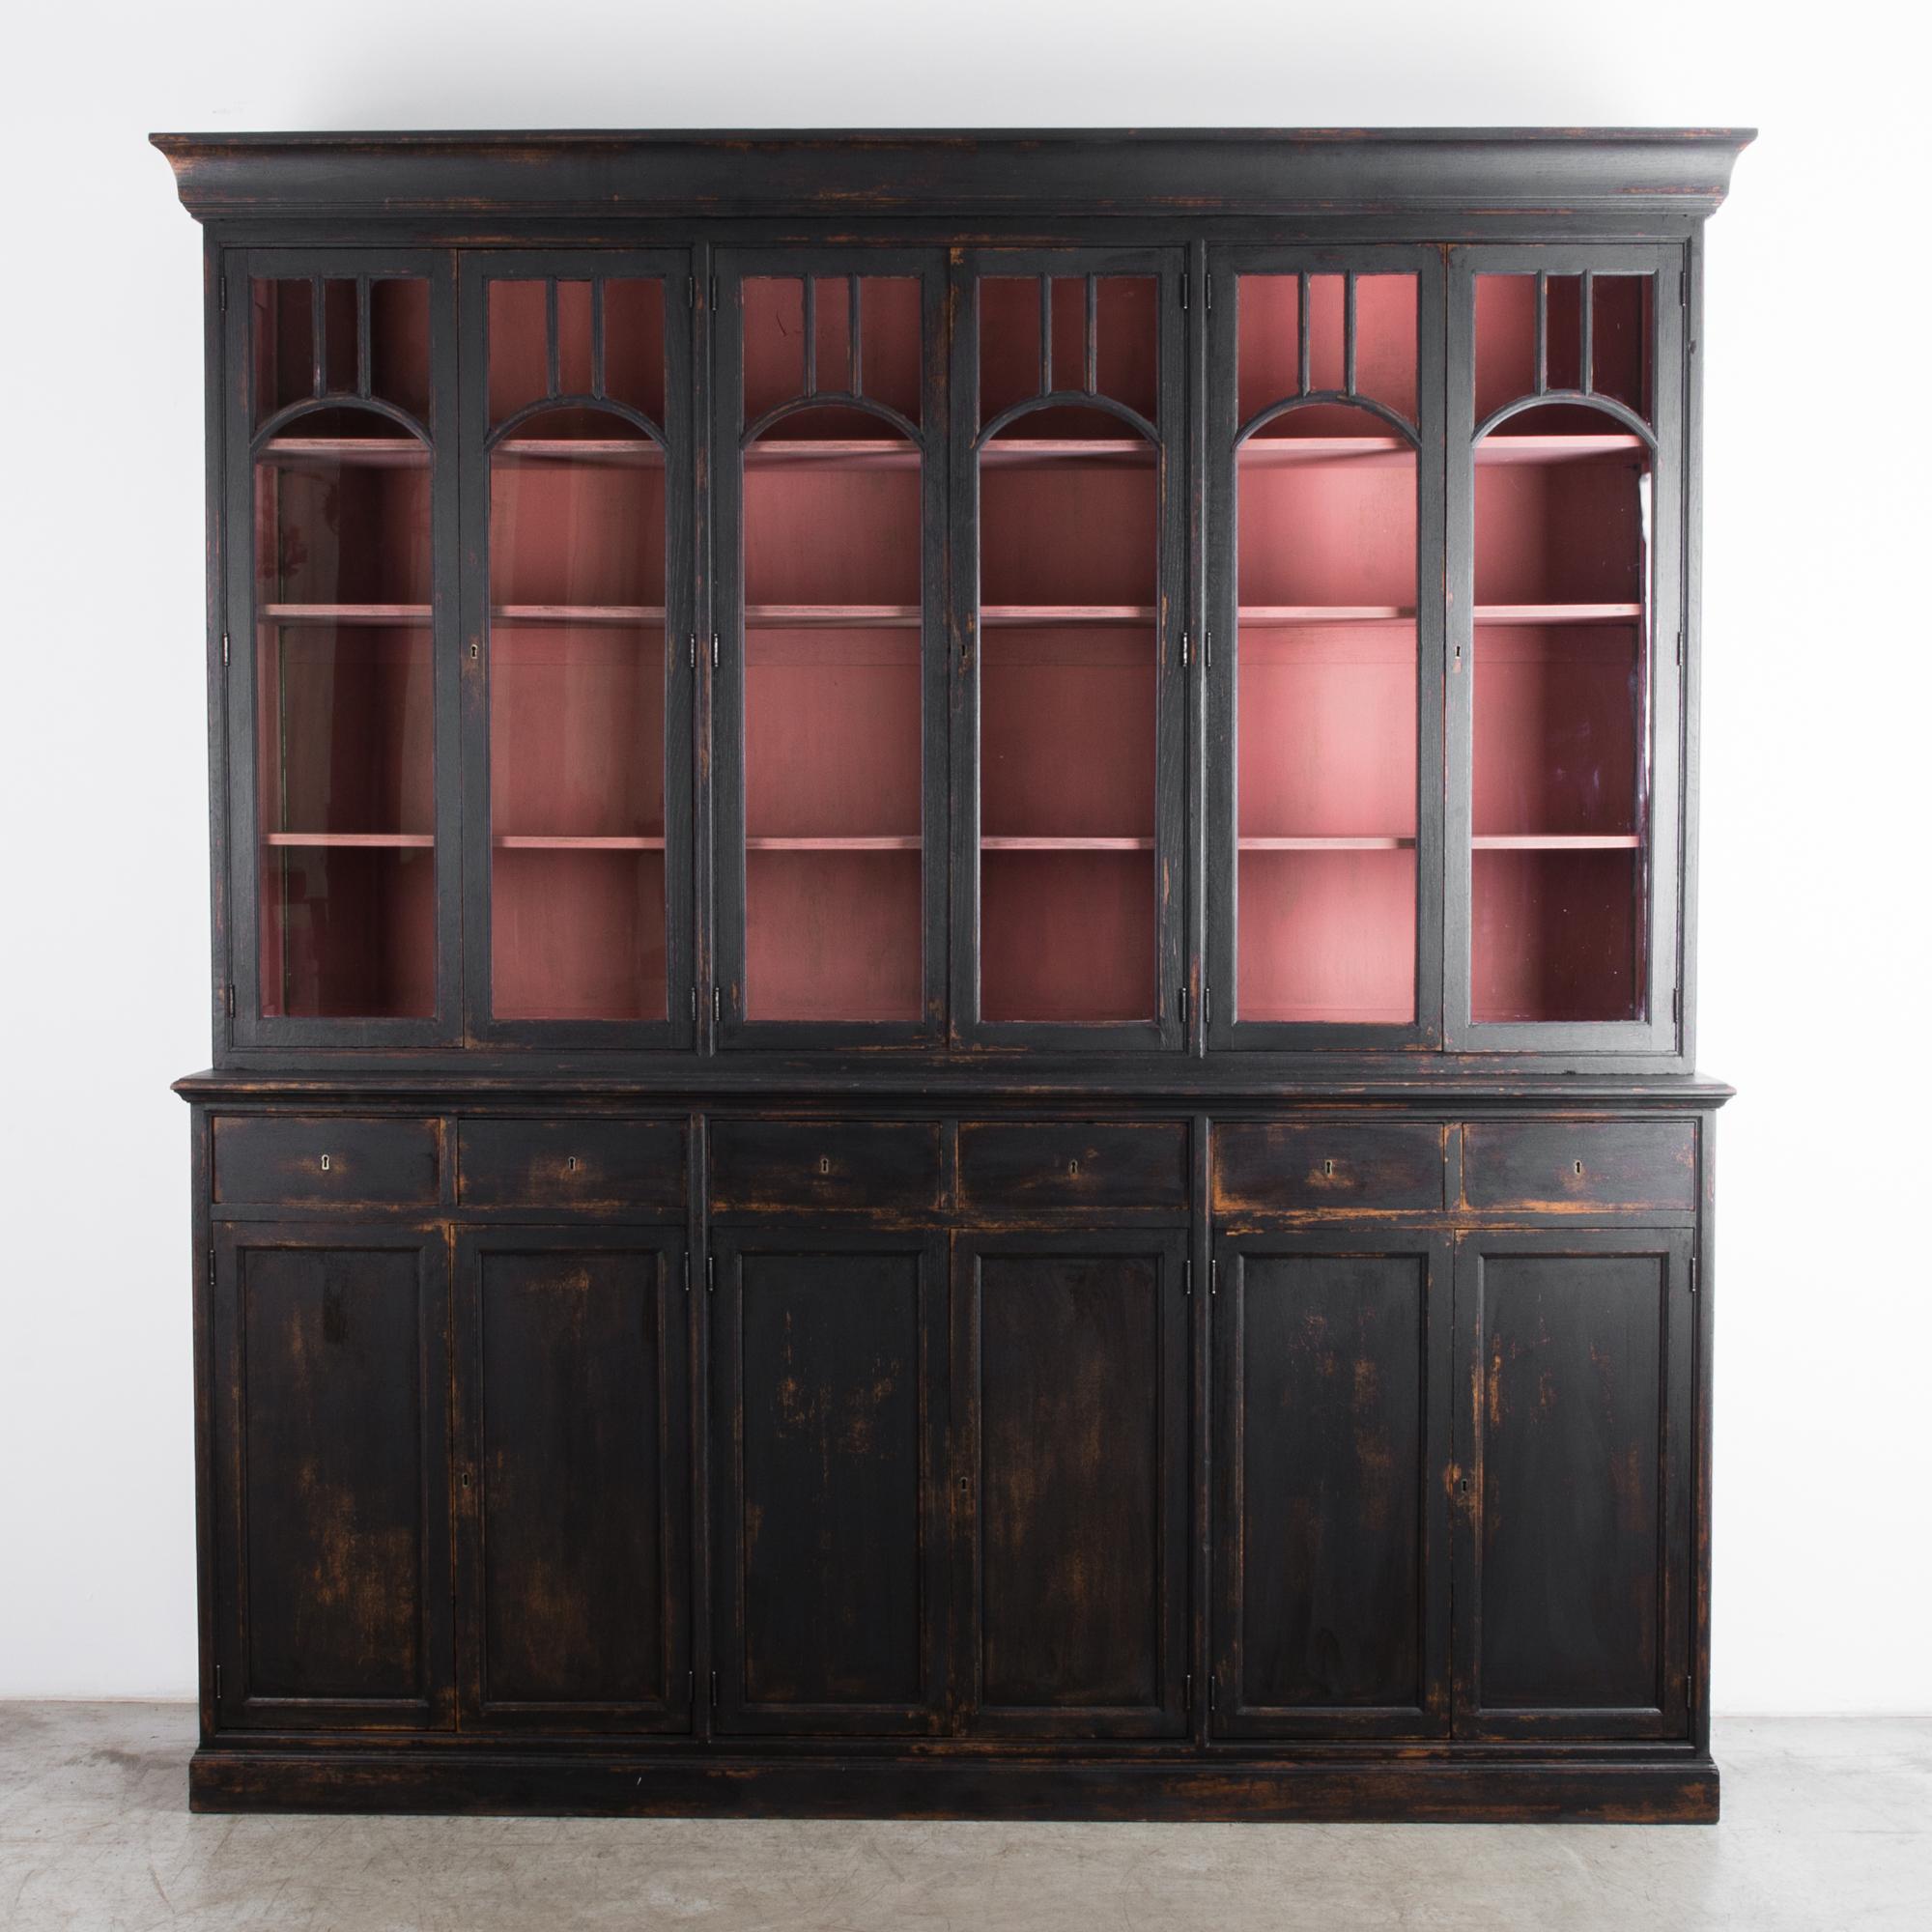 A well structured large cabinet from the Namur region of Belgium. Atmospheric dark color is supported by visual rhythm-- a pattern of vertical lines, enhanced by linear edge detail. Constructed in the tradition of regional furniture makers, with a